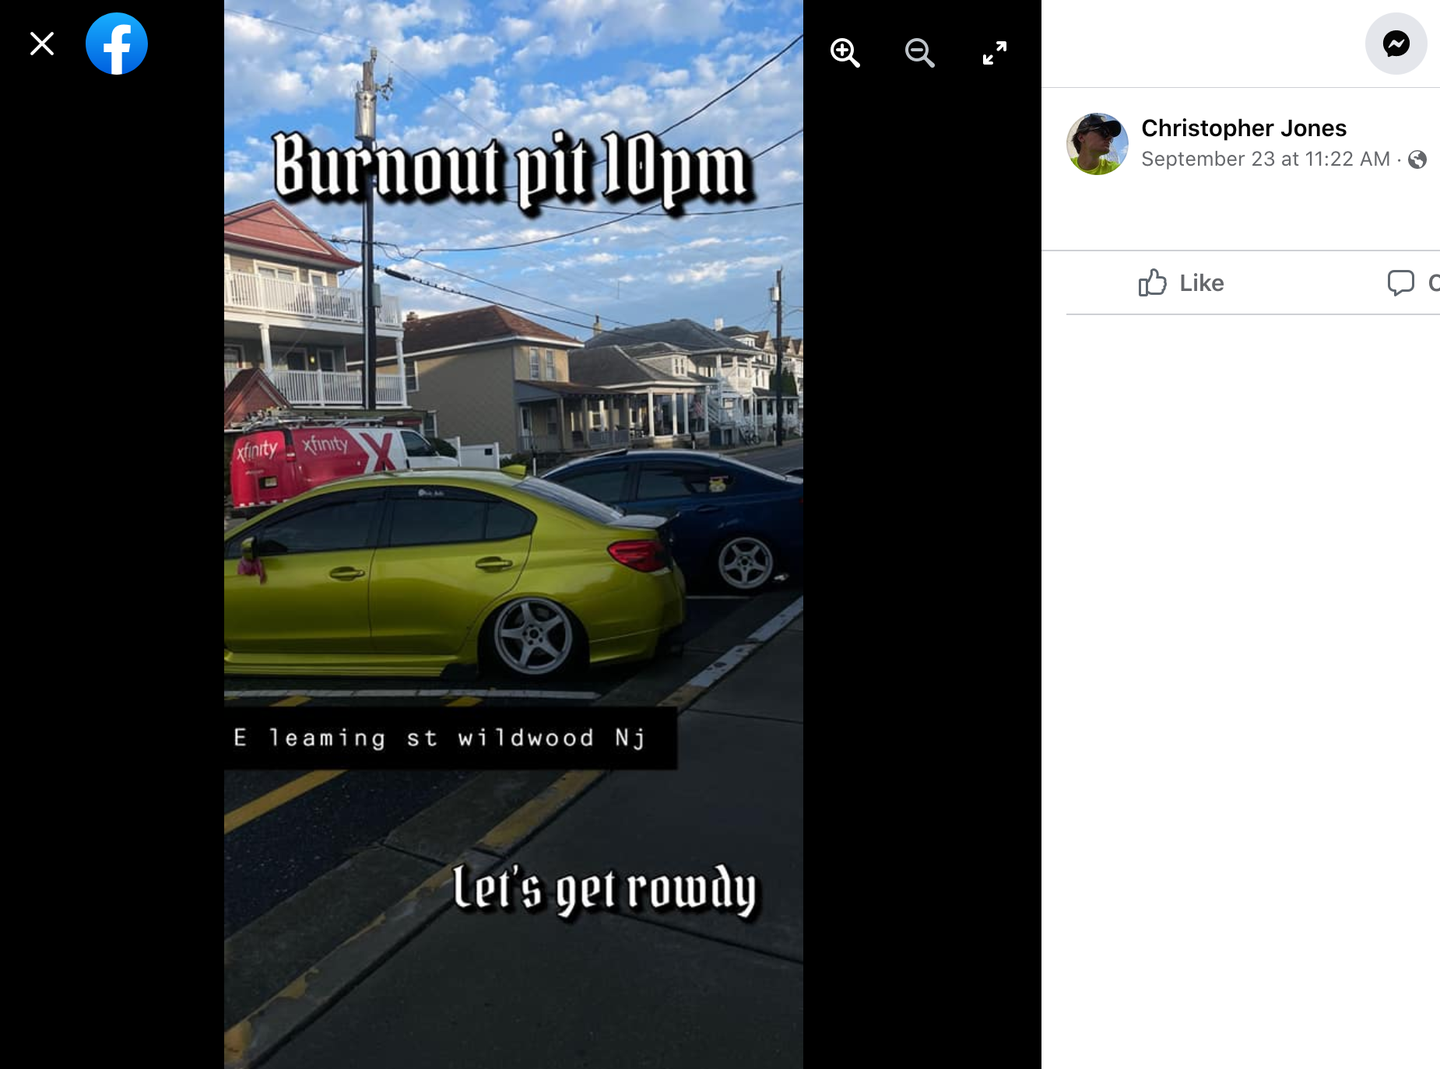 Posts in the "H2oi wildwood 2022" Facebook group advertised spots to meet up and do burnouts.